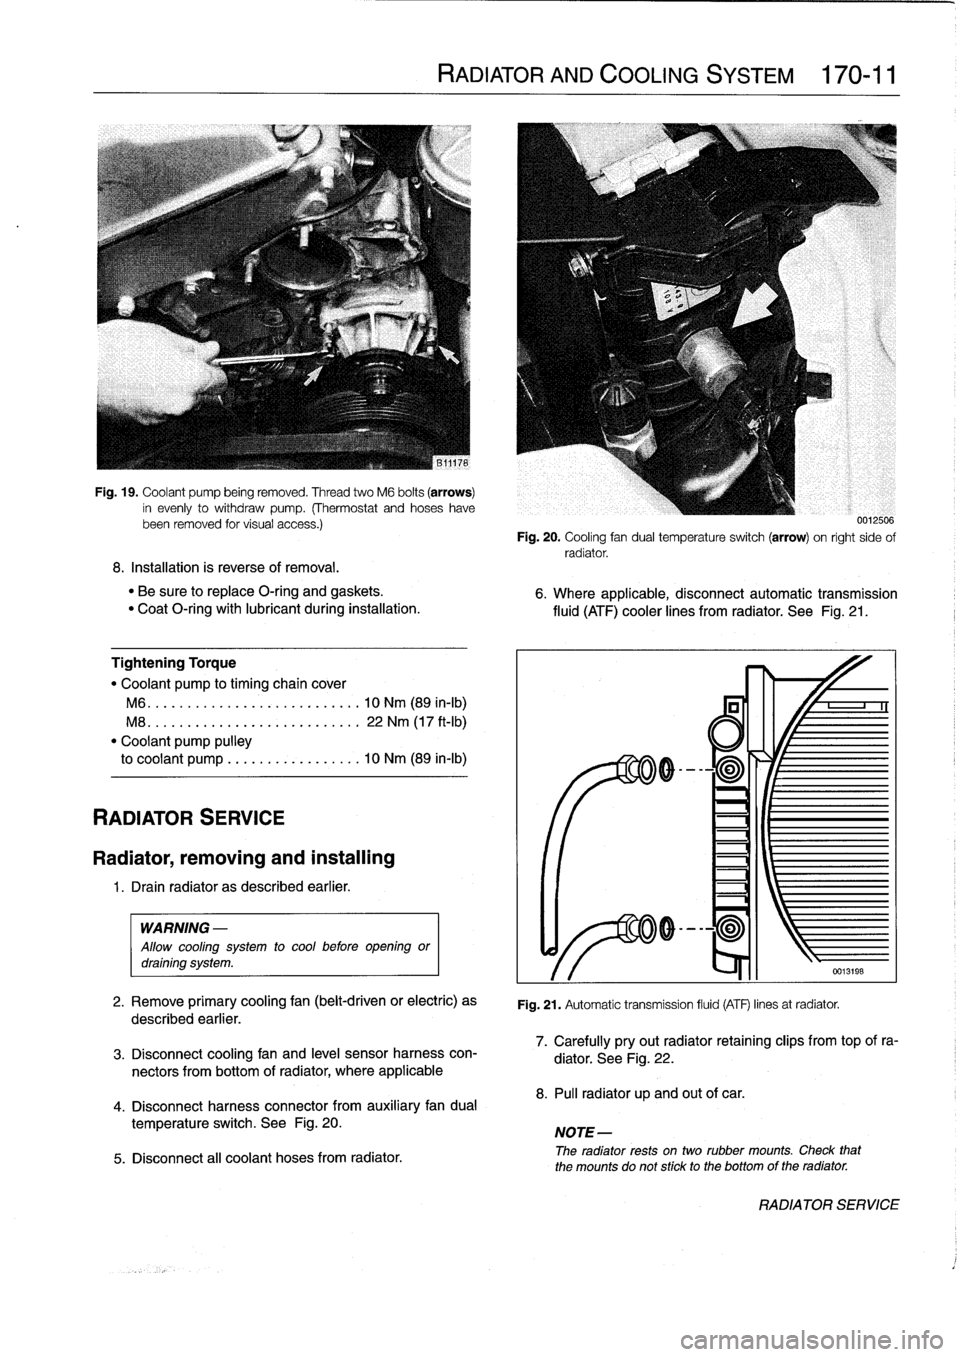 BMW 318i 1994 E36 Workshop Manual 
Fig
.
19
.
Coolant
pump
being
removed
.
Thread
two
M6
bolts
(arrows)
in
evenly
to
withdraw
pump
.
(Thermostat
and
hoseshavebeen
removed
tor
visual
access
.)

8
.
Installation
is
reverse
of
removal
.
